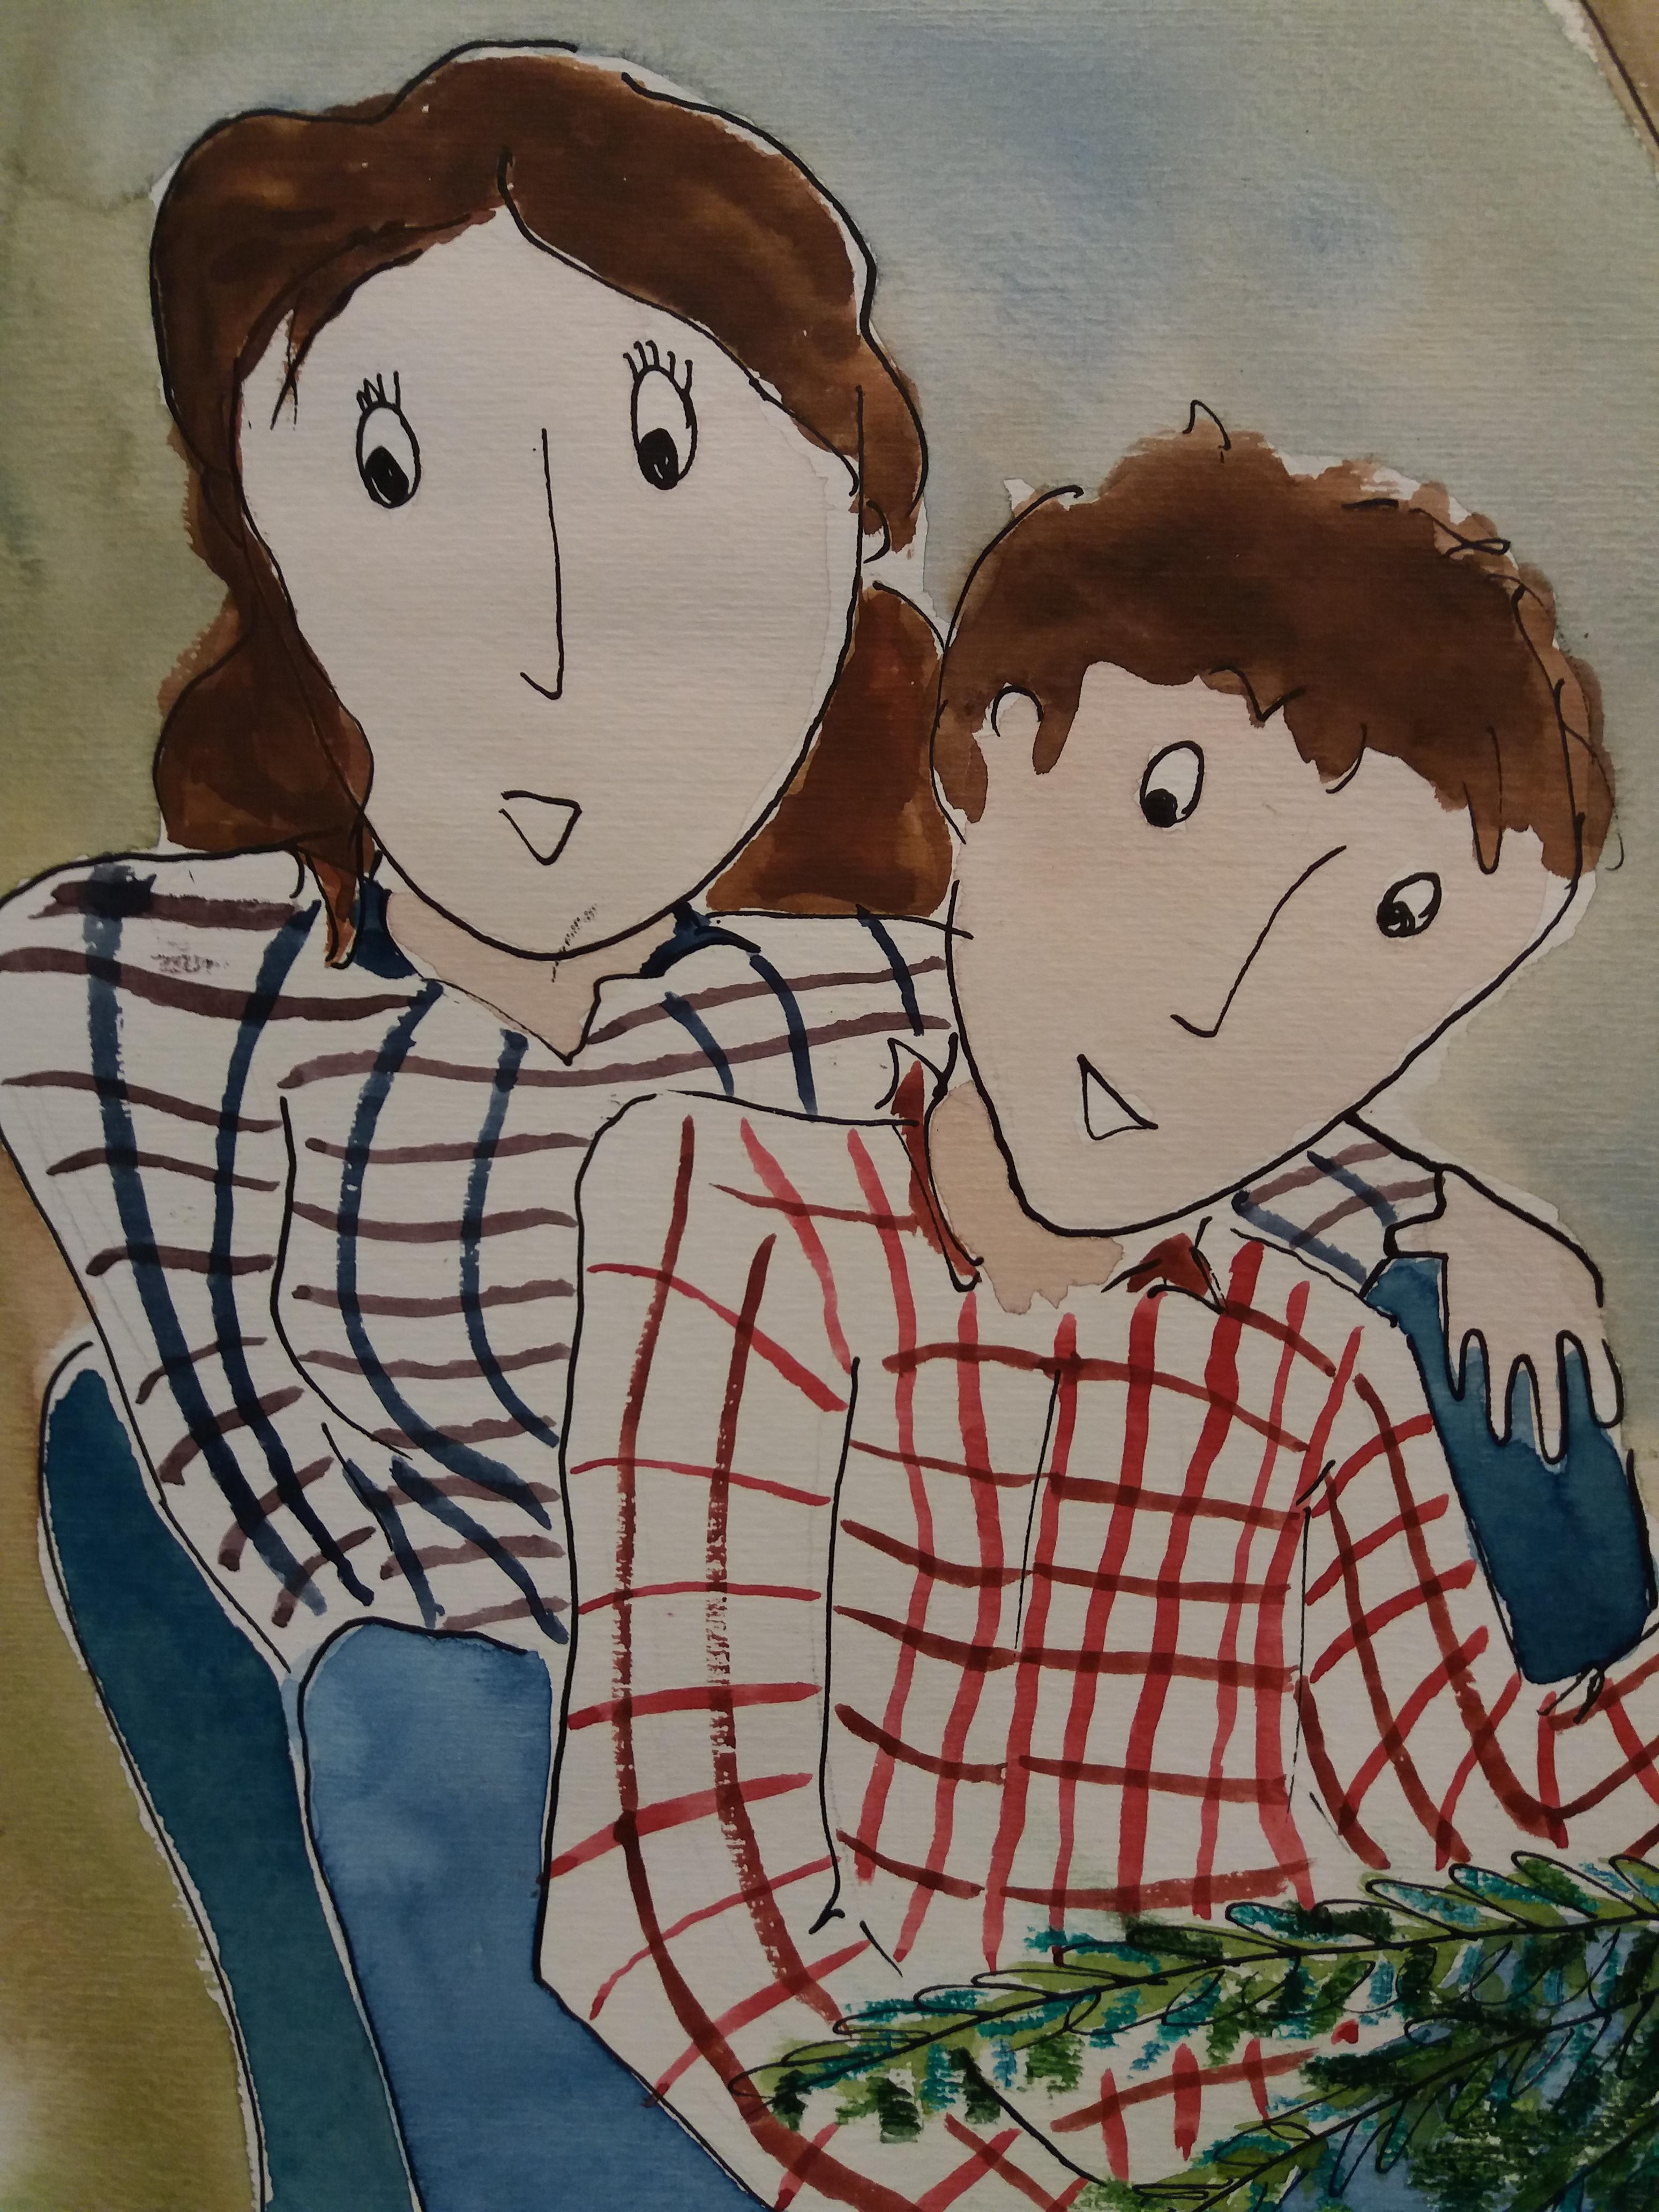 FAMILY. original watercolor naif contemporary painting. 
Subirachs Ferrer is, besides an extremely gifted painter and draftsman, an illustrator who denotes, in each of her pieces, a vocation that intelligently connects with the classical and factual